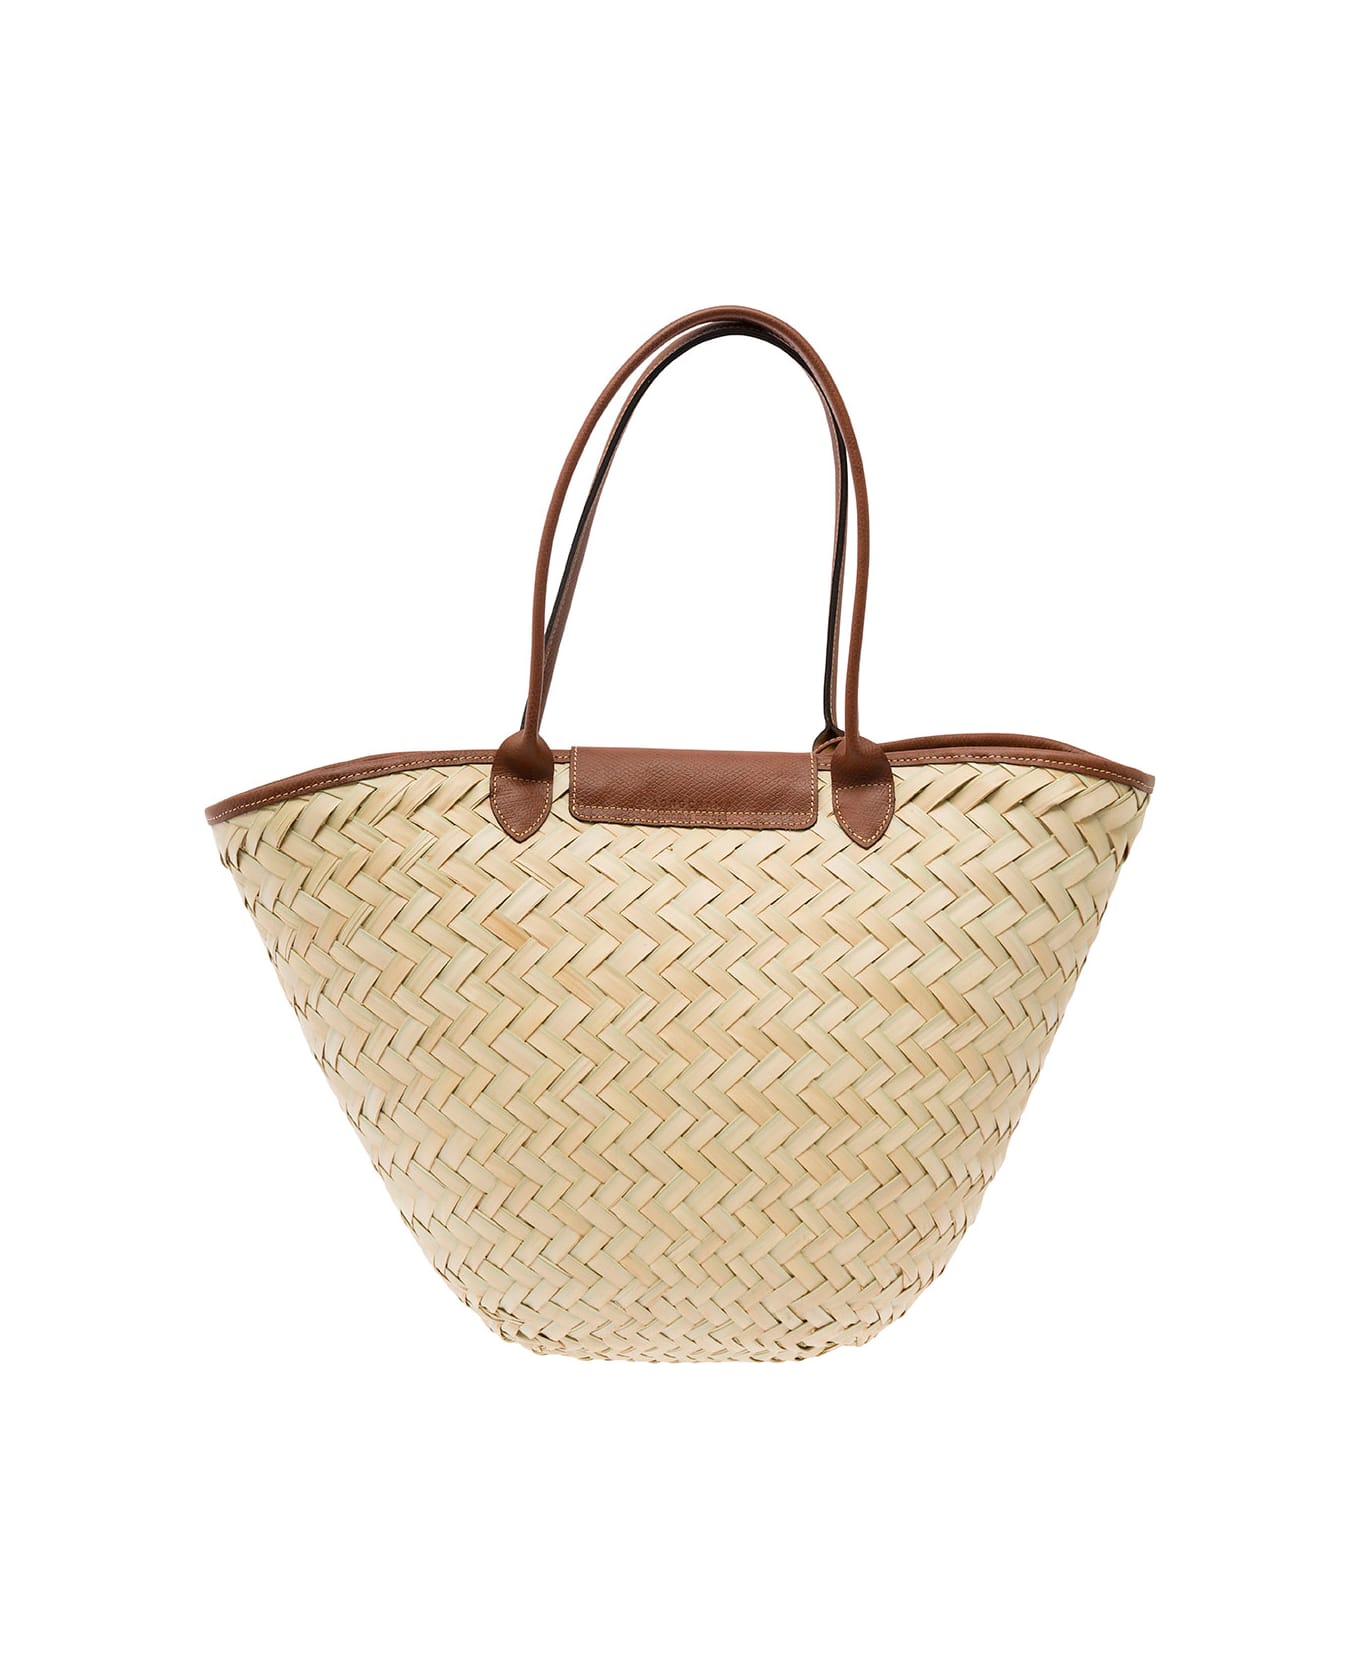 Longchamp 'xl Le Panier' Beige Tote Bag With Beads Strap In Straw Woman - Beige